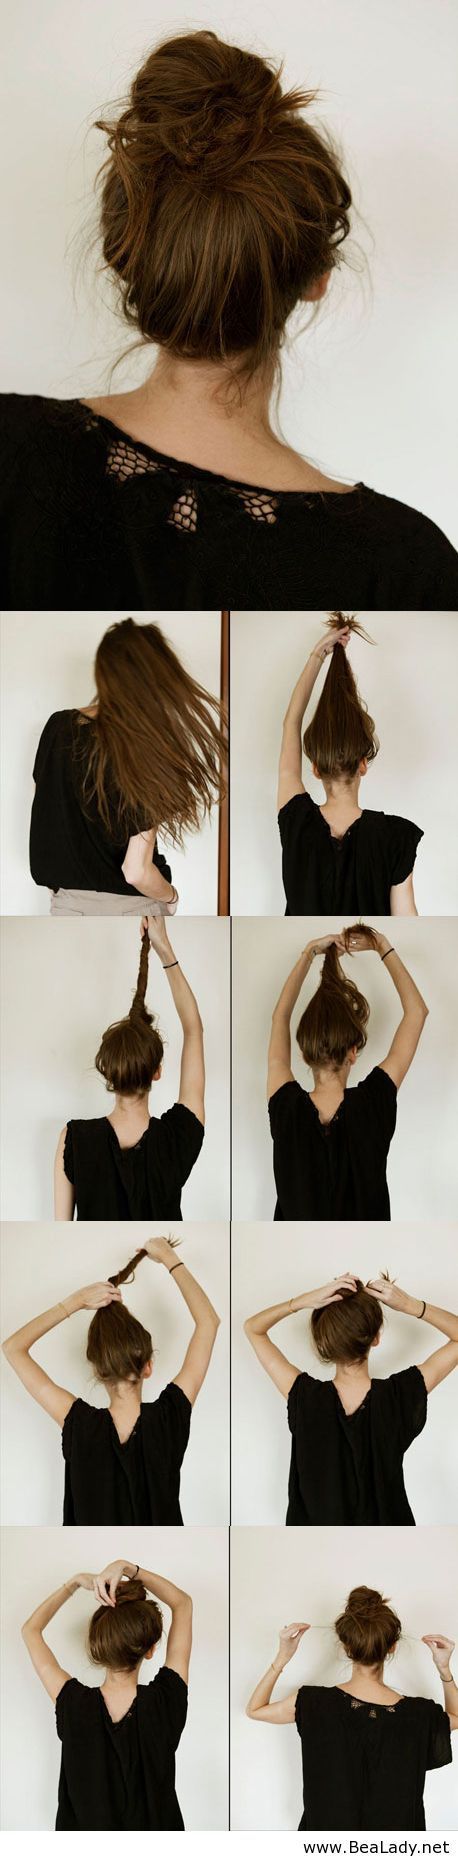 Knotted Top Bun Hairstyle